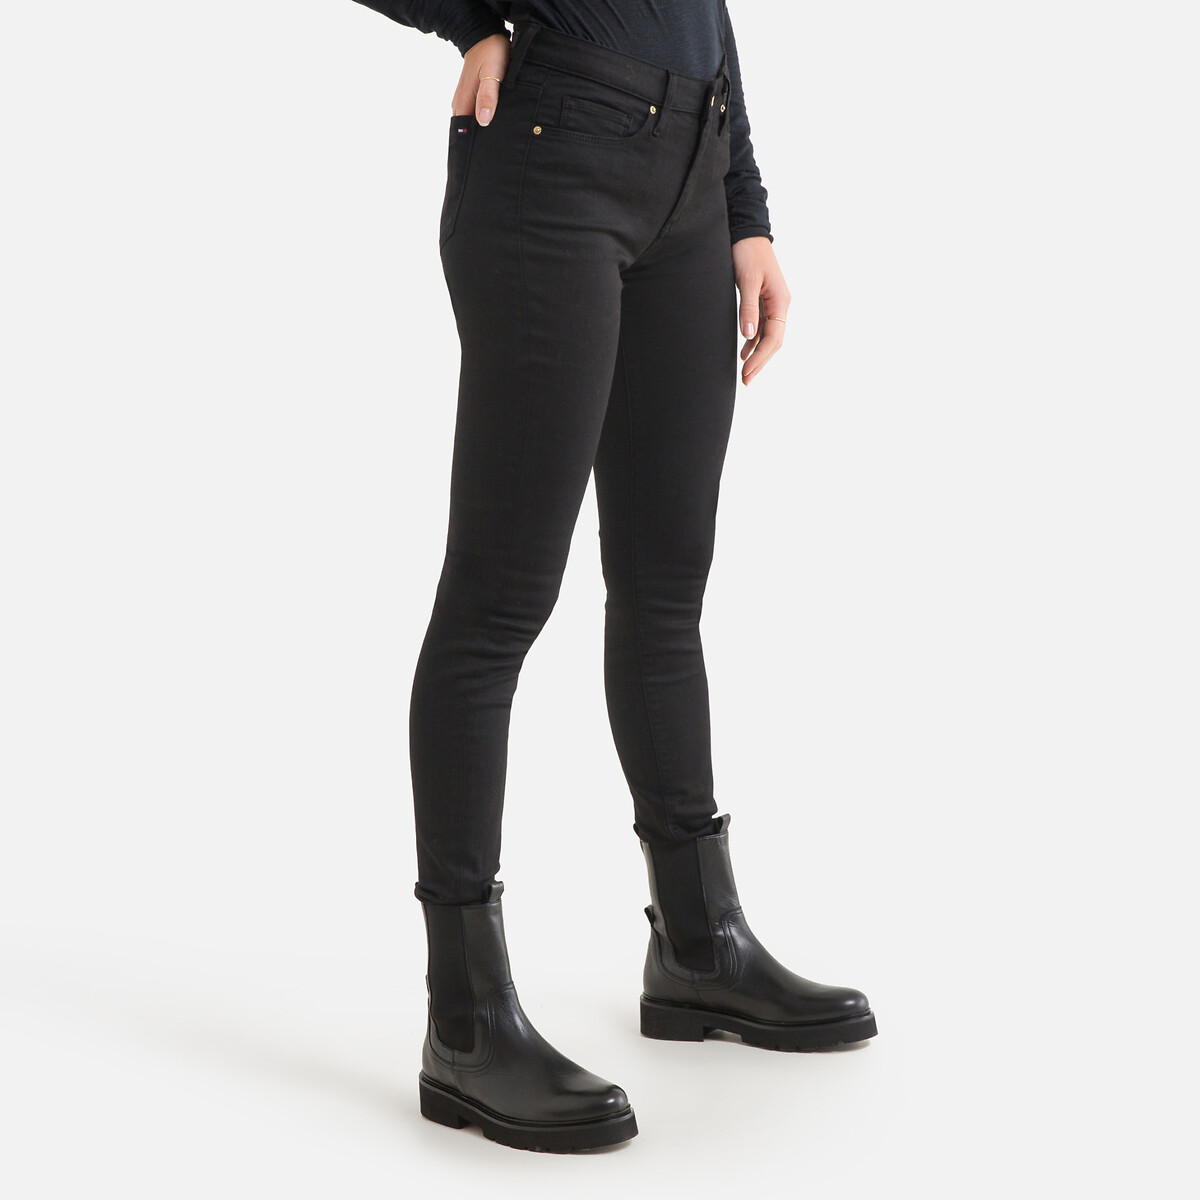 Image of Slim Fit Jeans, Mid Rise Length 31"